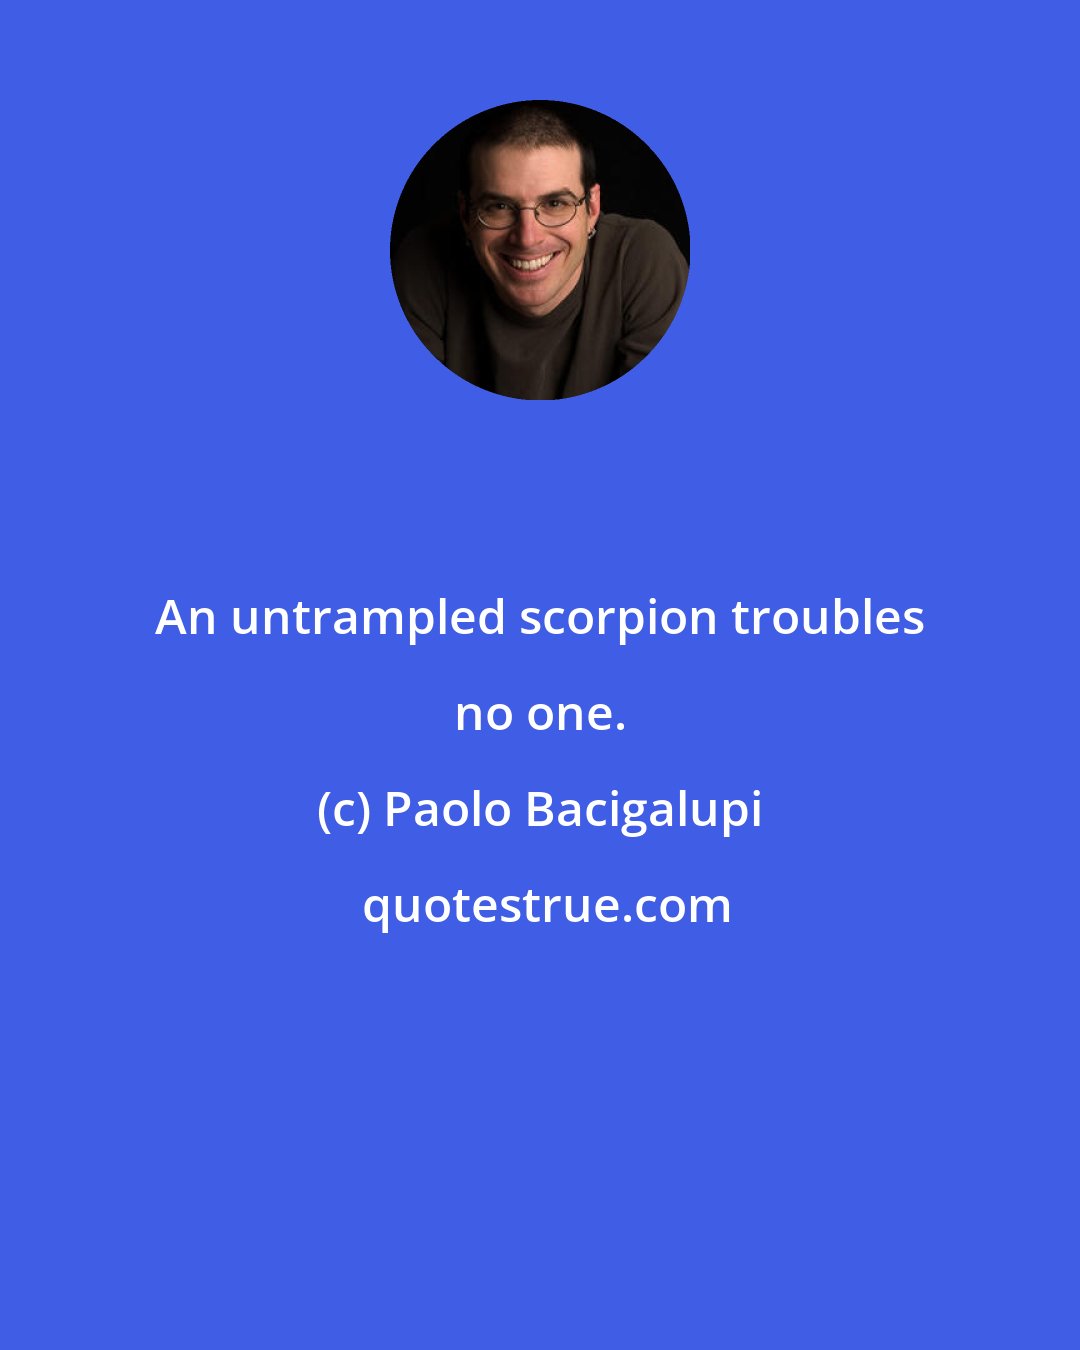 Paolo Bacigalupi: An untrampled scorpion troubles no one.